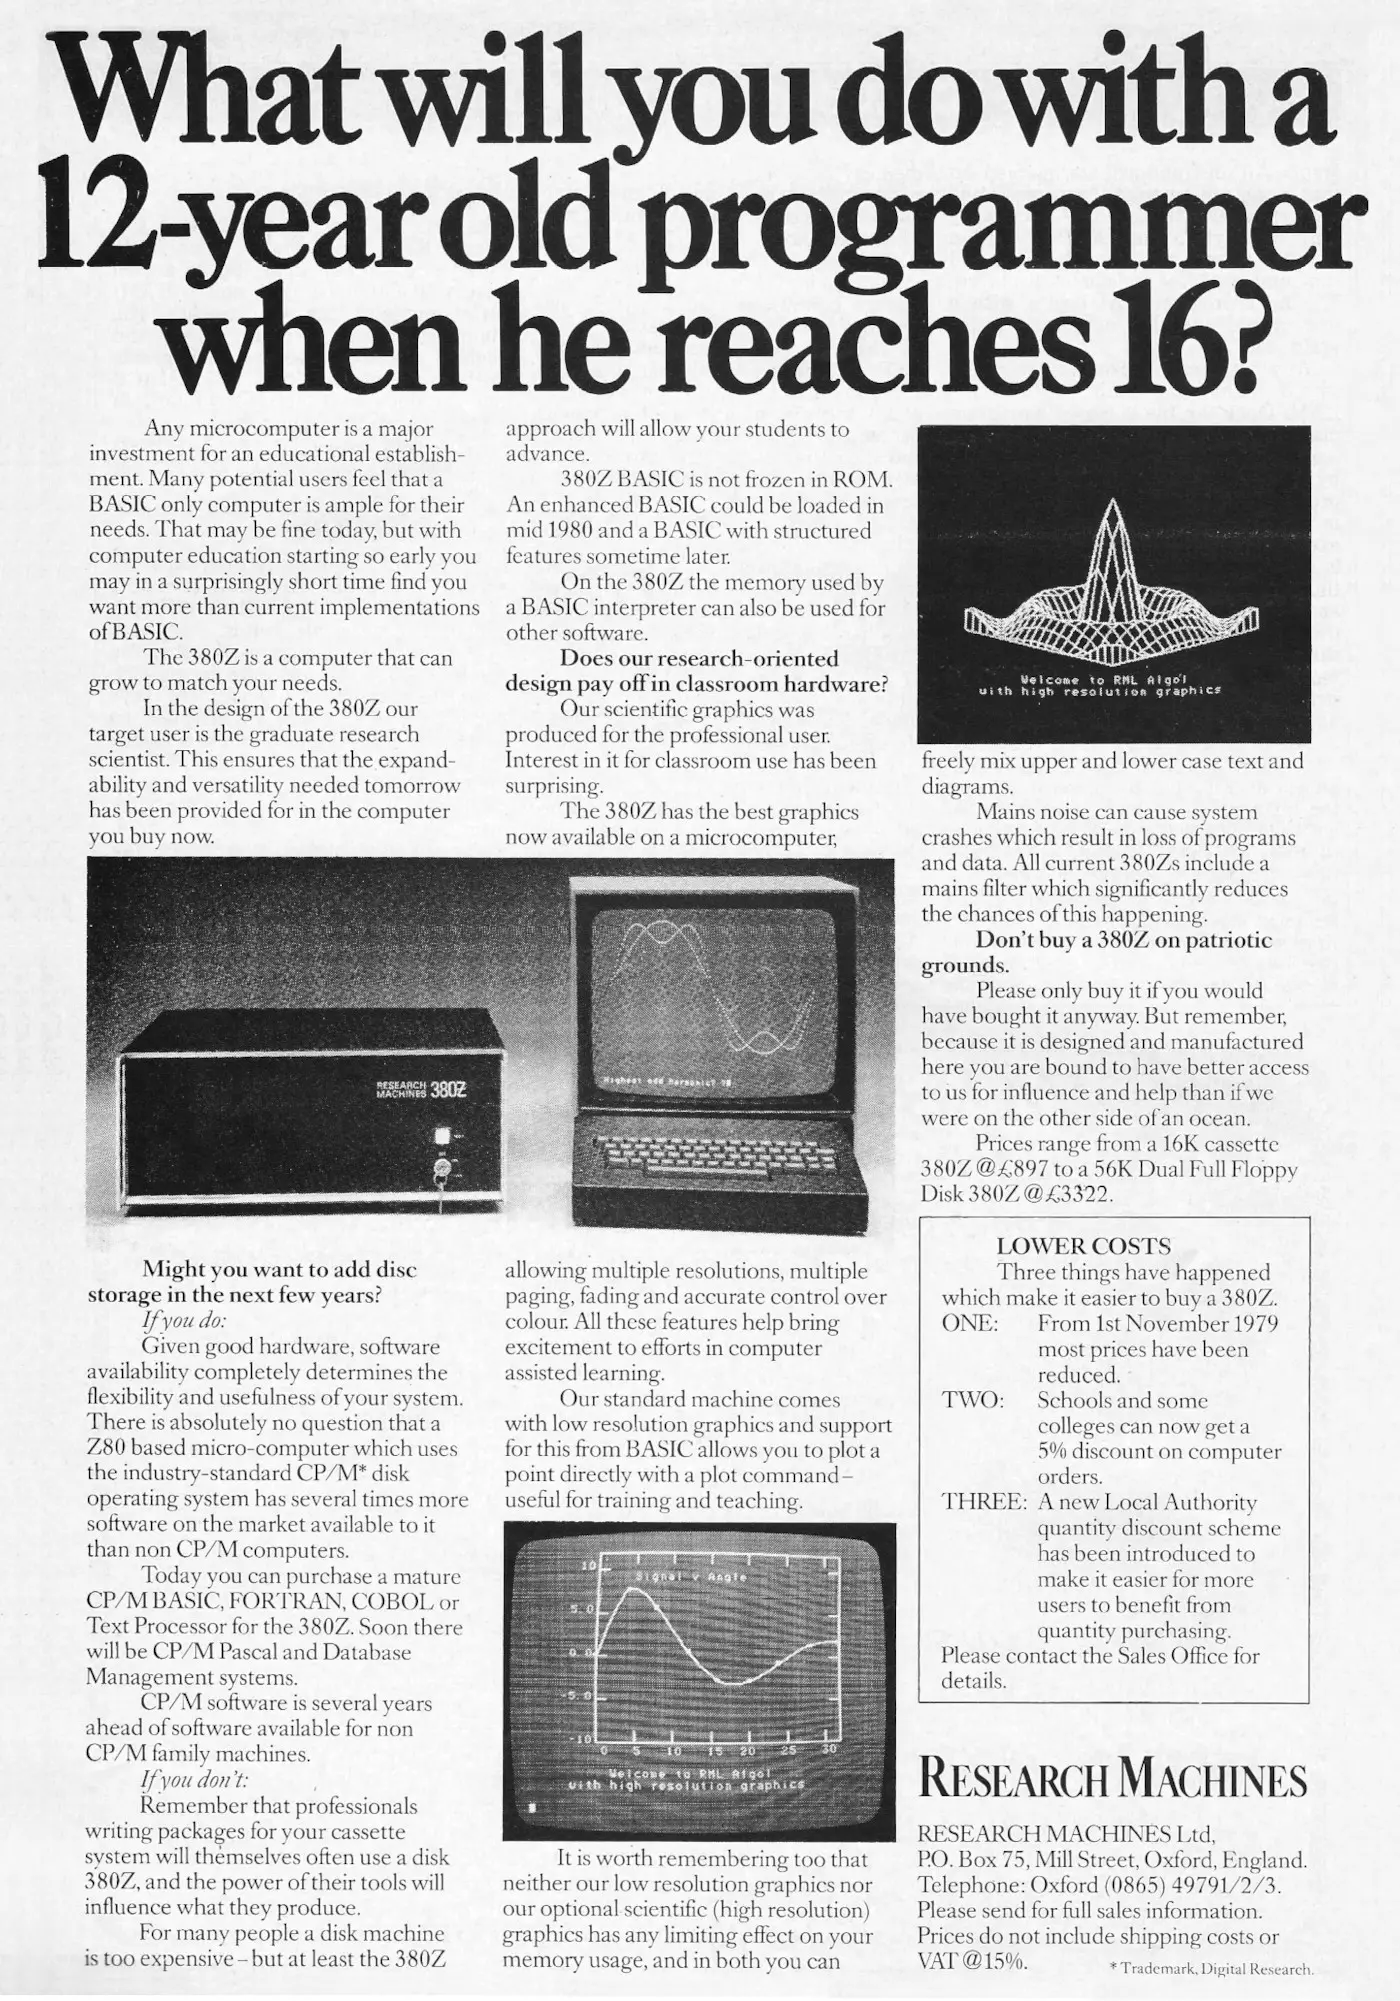 Research Machines Advert: What will you do with 12-year-old programmers when he reaches 16?, from Personal Computer World, October 1980